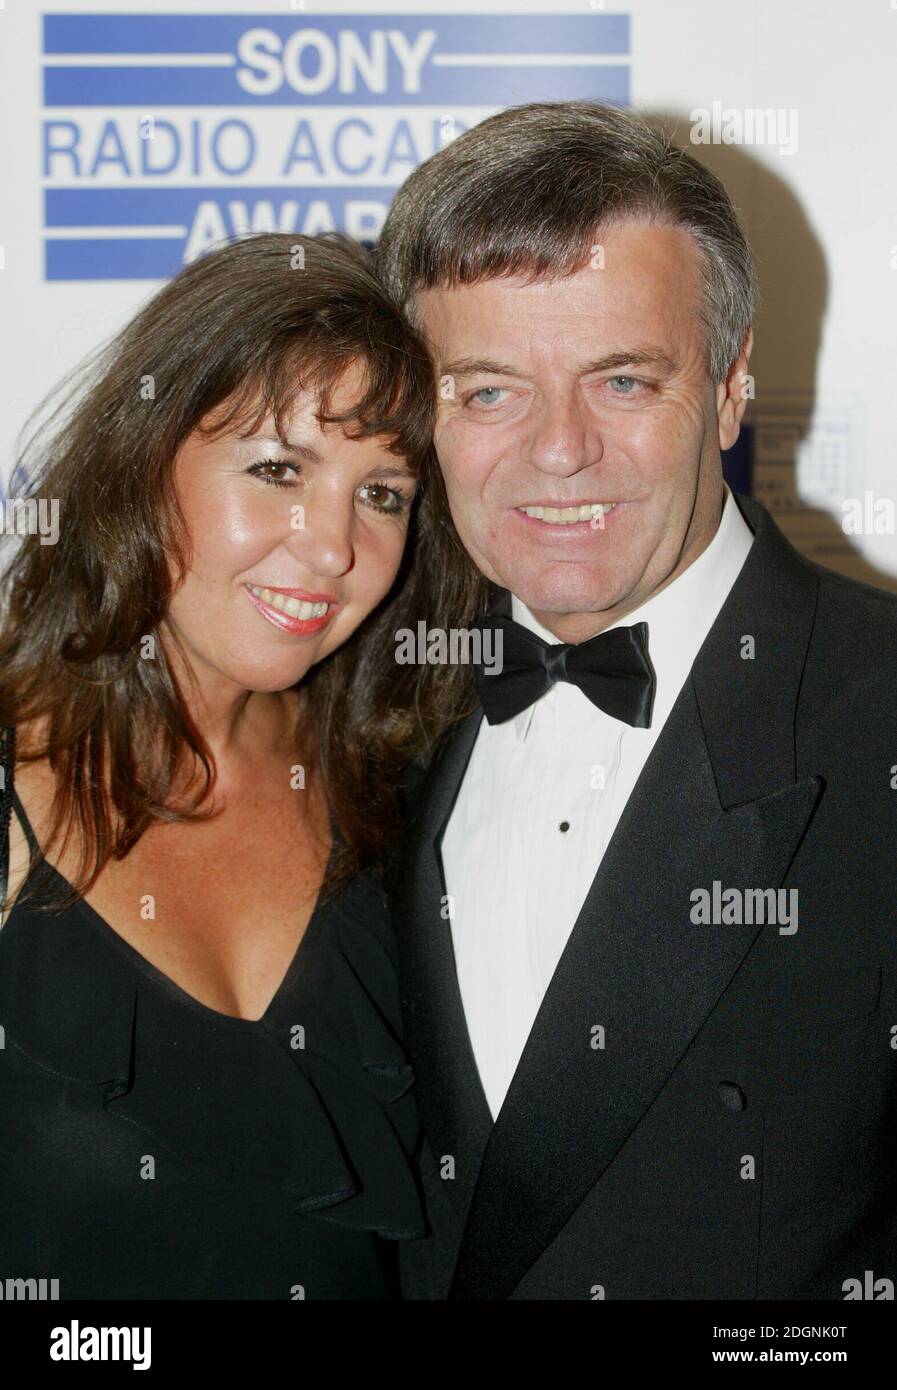 Tony Blackburn and wife at the Sony Radio Academy Awards held at the Grosvenor House Hotel in Londons Park Lane. Half length.  Â©doug peters/allaction.co.uk  Stock Photo